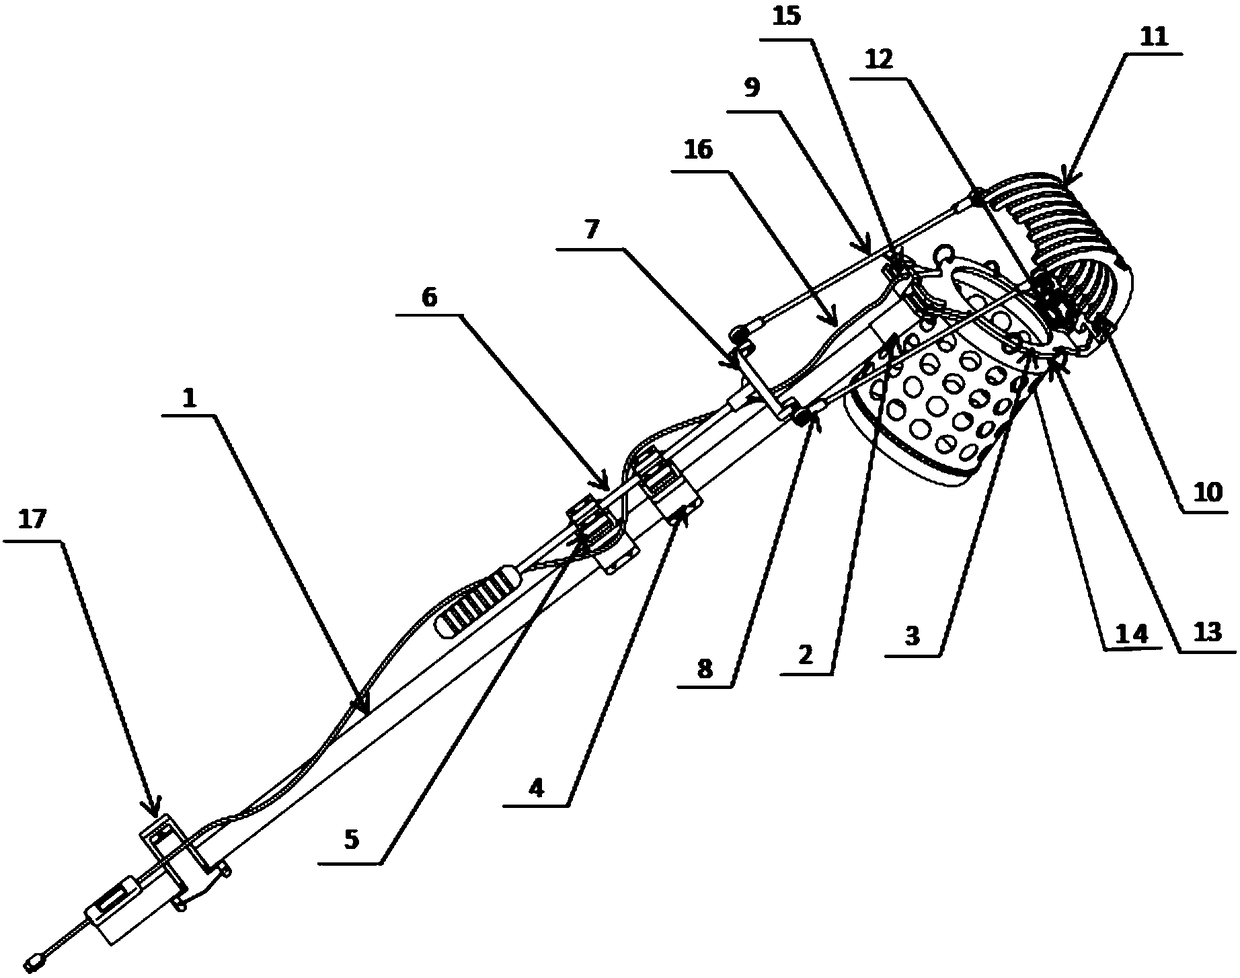 Auxiliary fruit picking device